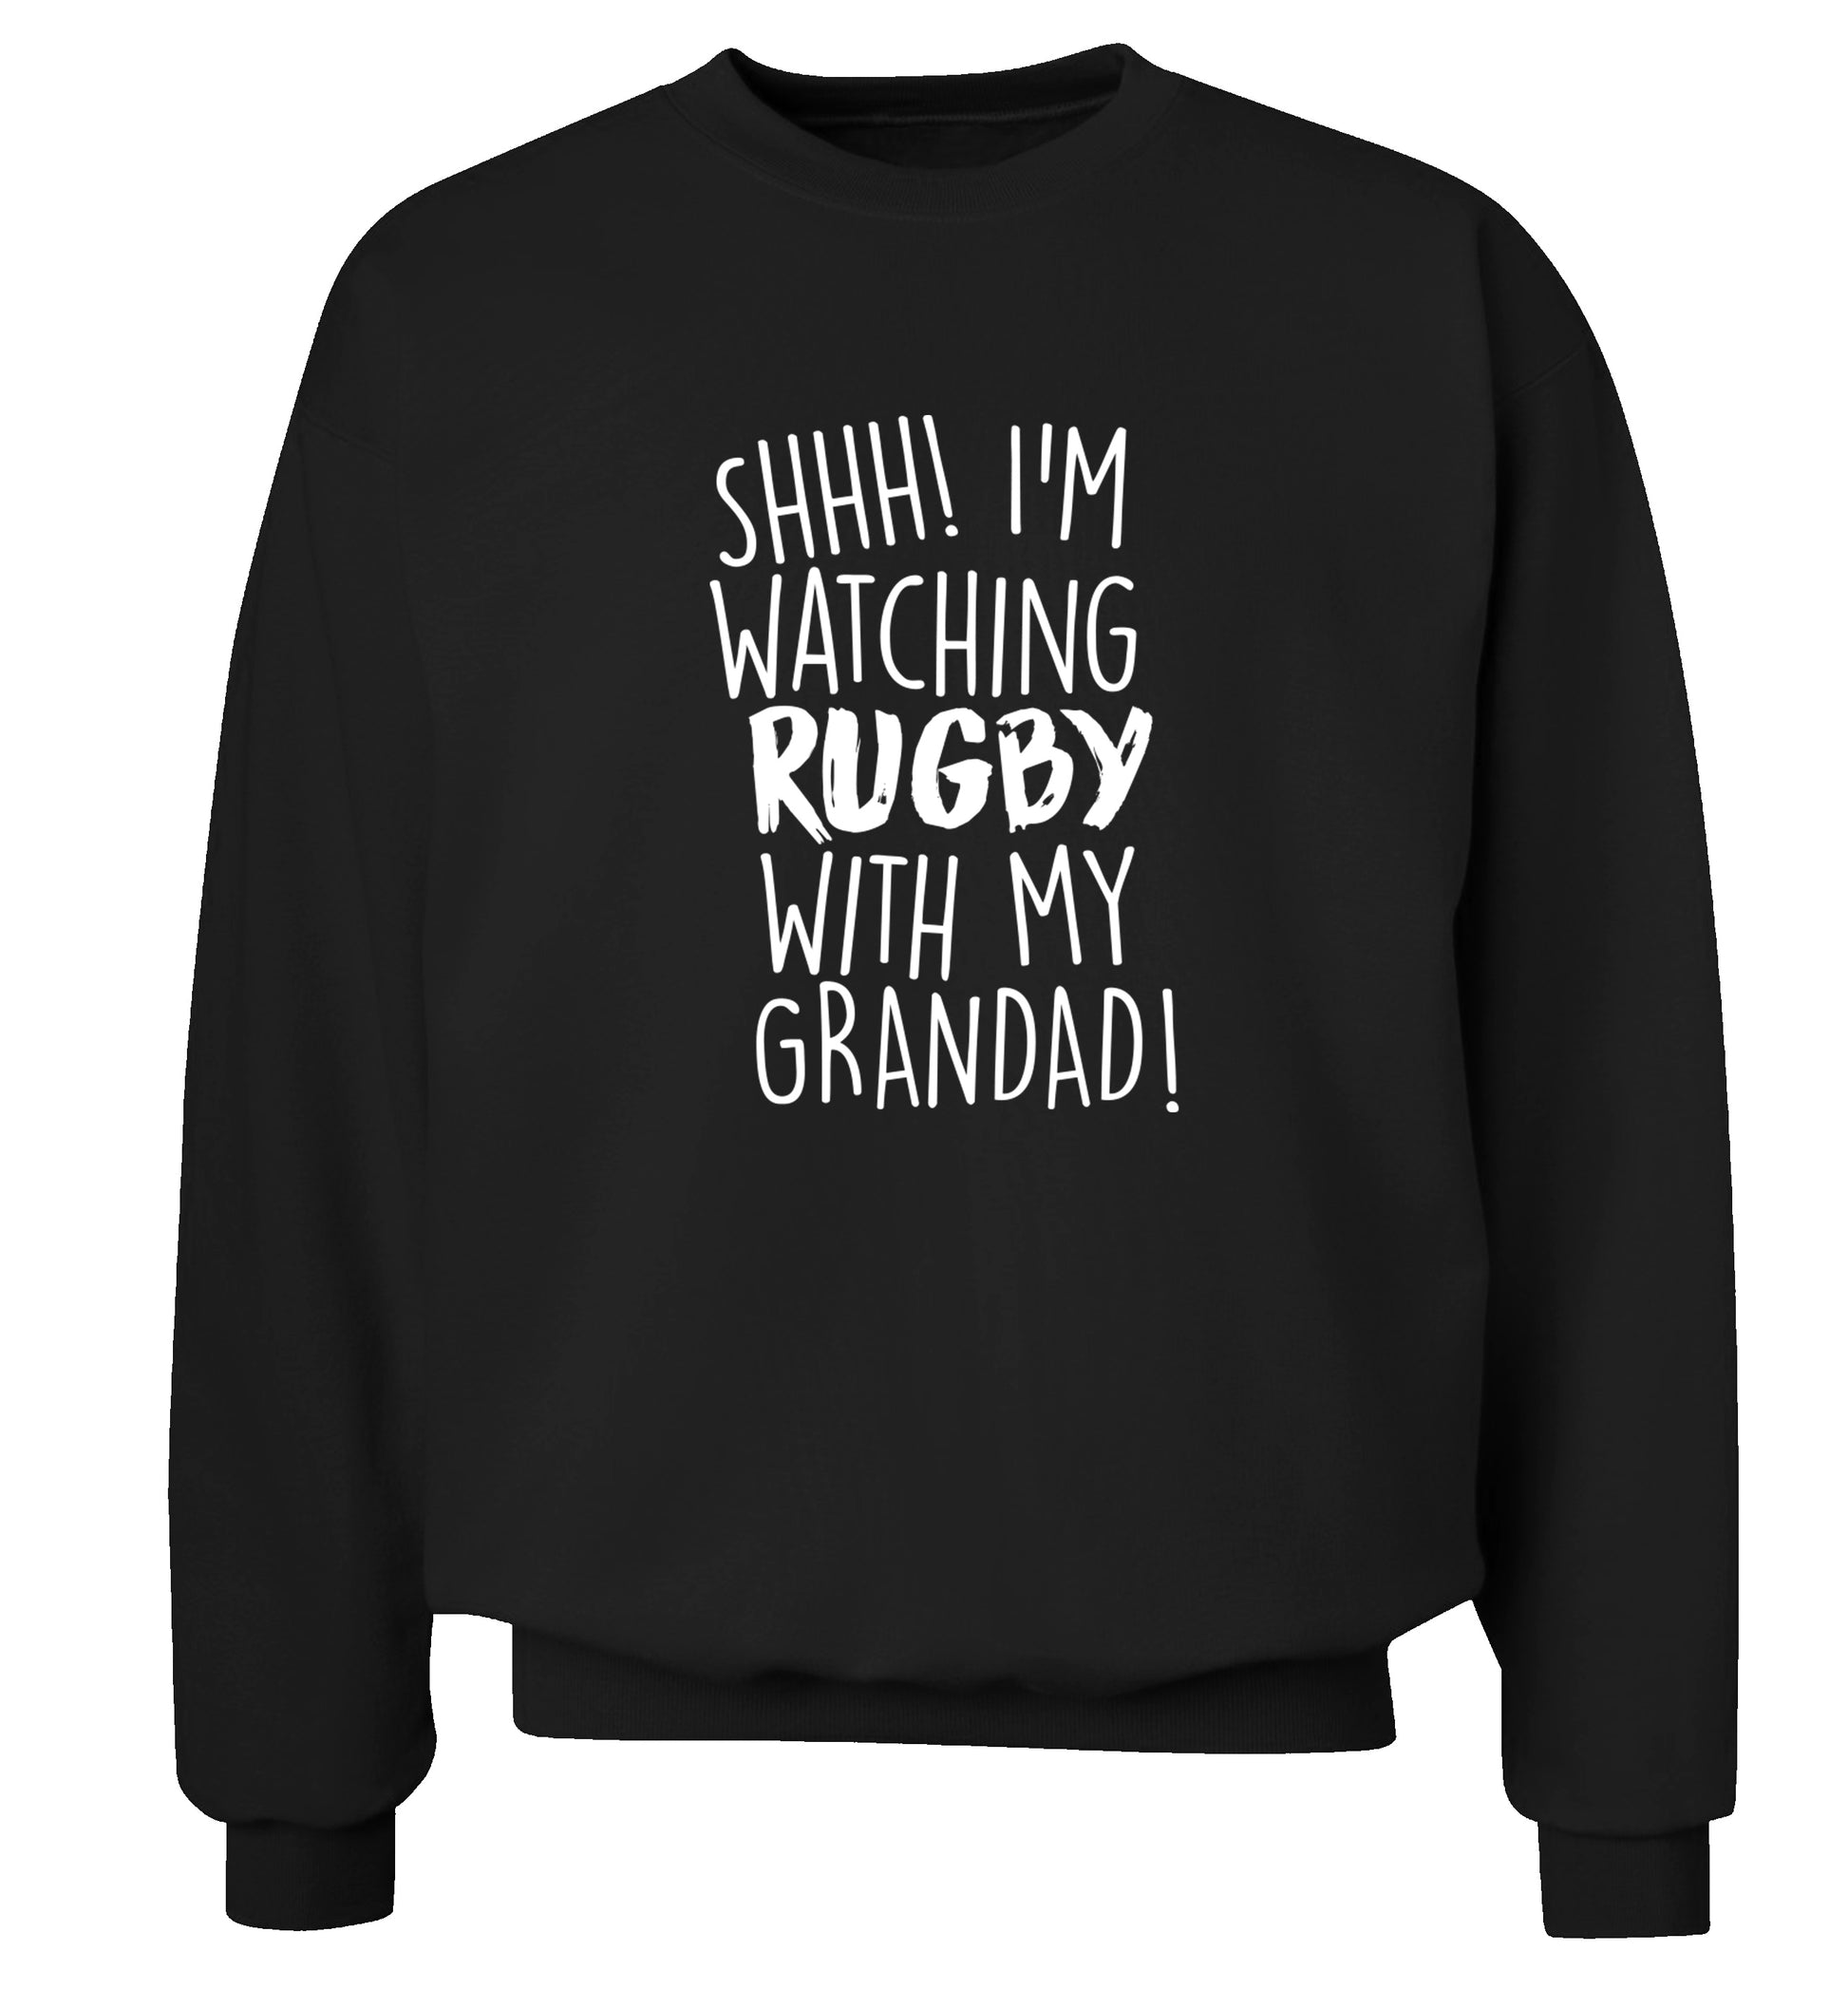 Shh I'm watching rugby with my grandad Adult's unisex black Sweater 2XL